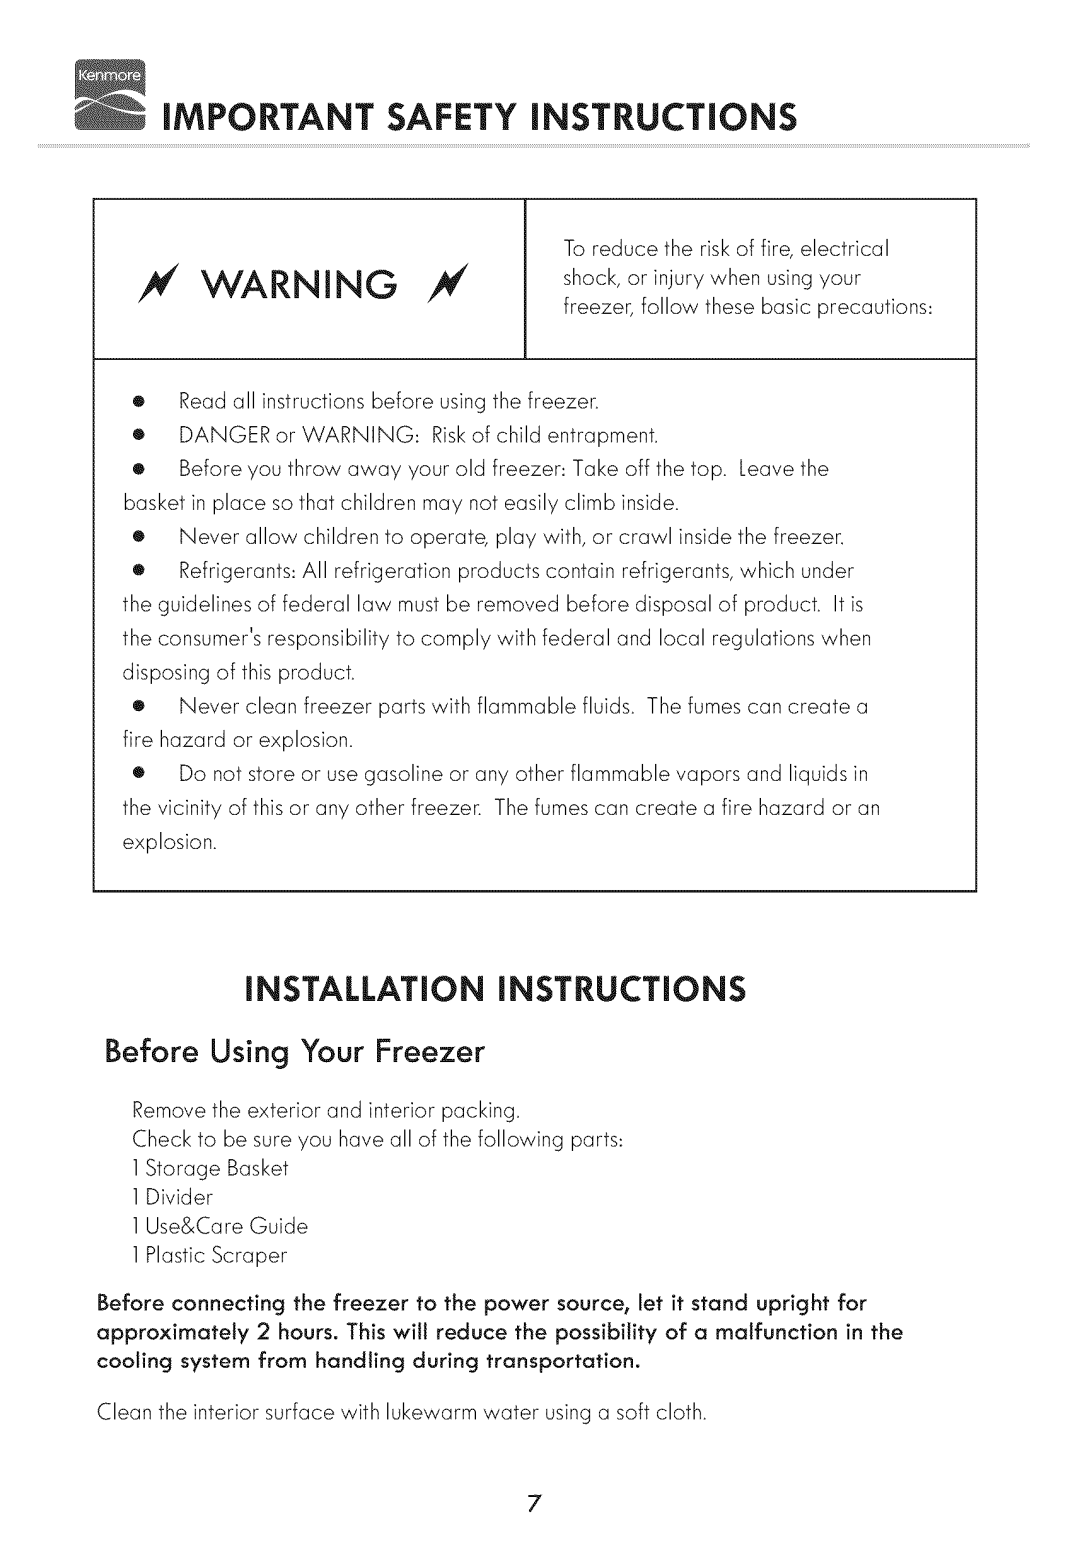 Kenmore 19502, 19702 manual iMPORTANT SAFETY INSTRUCTIONS, iNSTALLATiON iNSTRUCTiONS, Before Using Your Freezer 